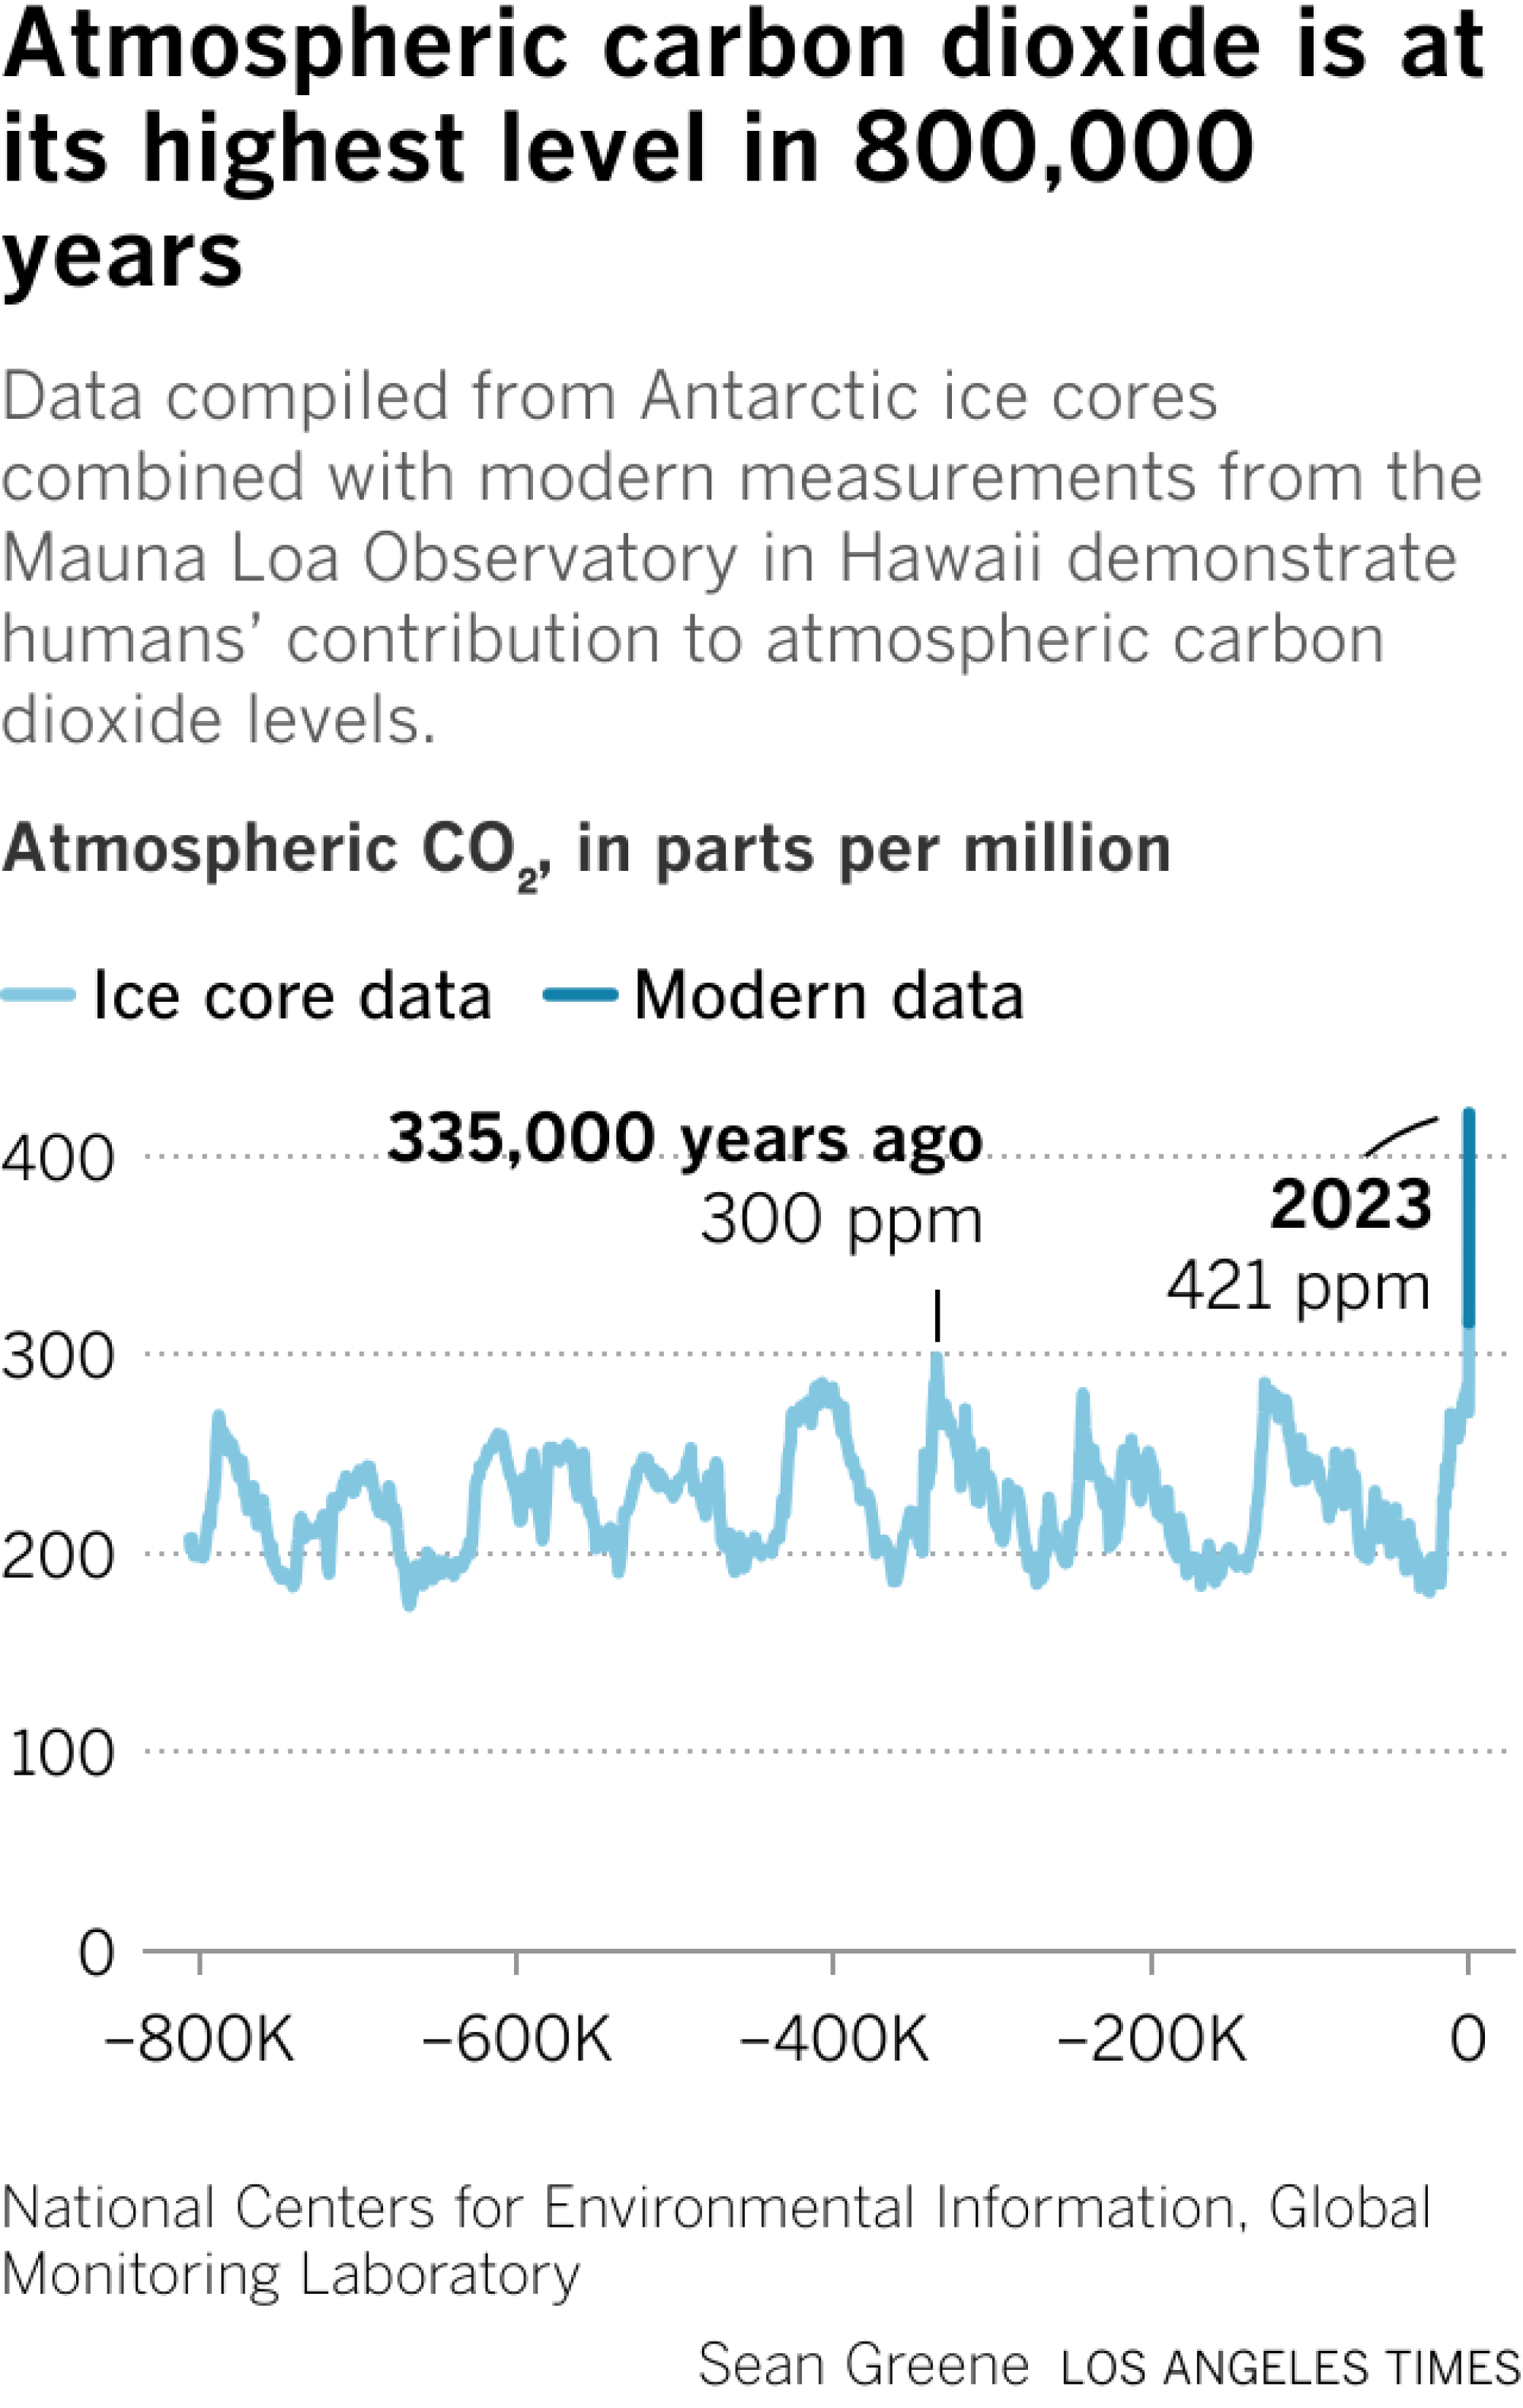 A line graph shows atmospheric carbon dioxide levels over the past 800,000 years.  The last time CO2 peaked was 335,000 years ago, at 300 parts per million.  In recent decades, the concentration has skyrocketed to 421 parts per million.